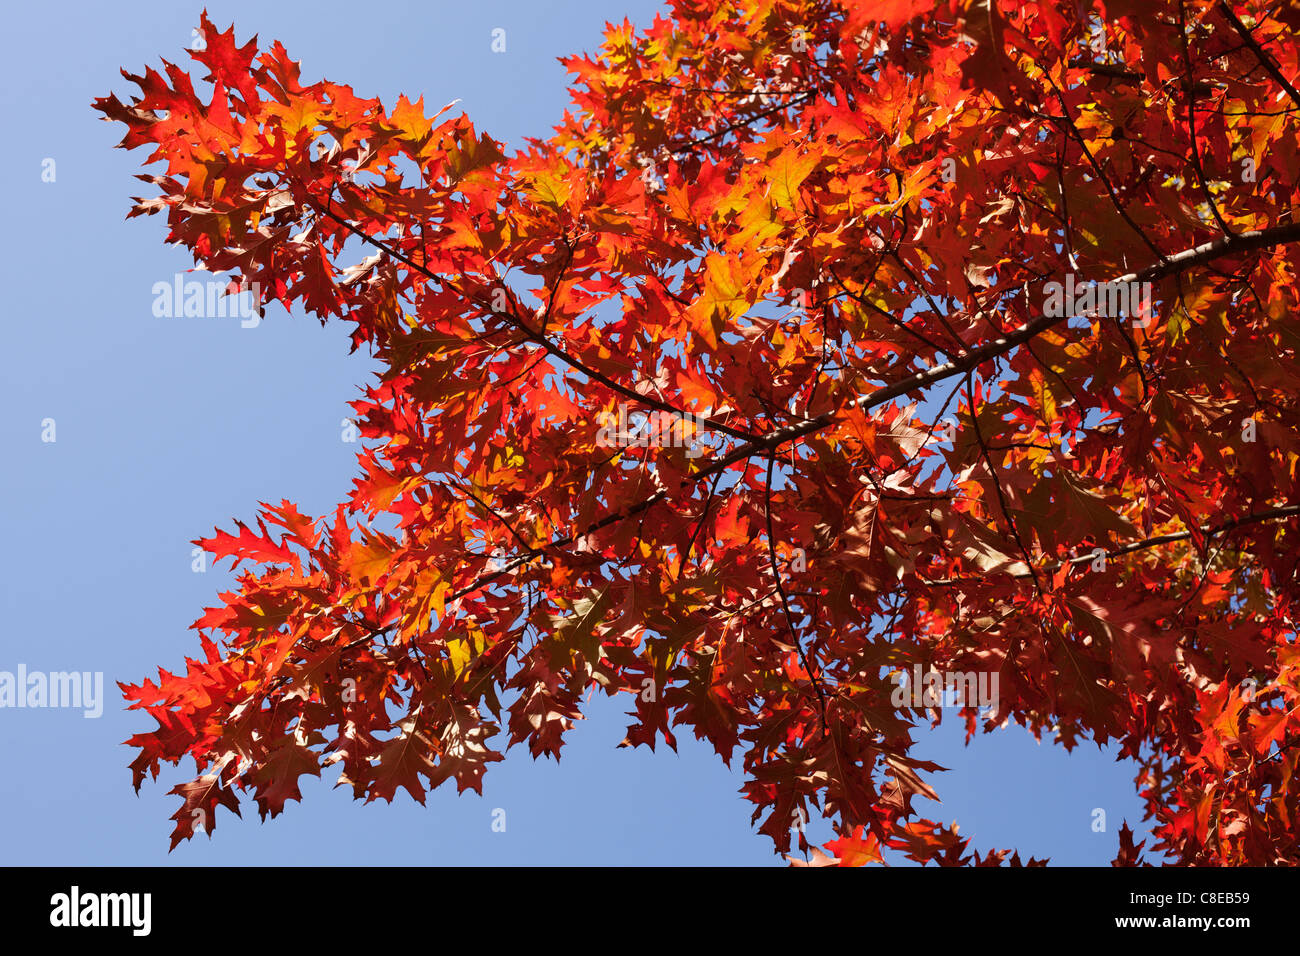 Autumn view of red oak leaves. Stock Photo